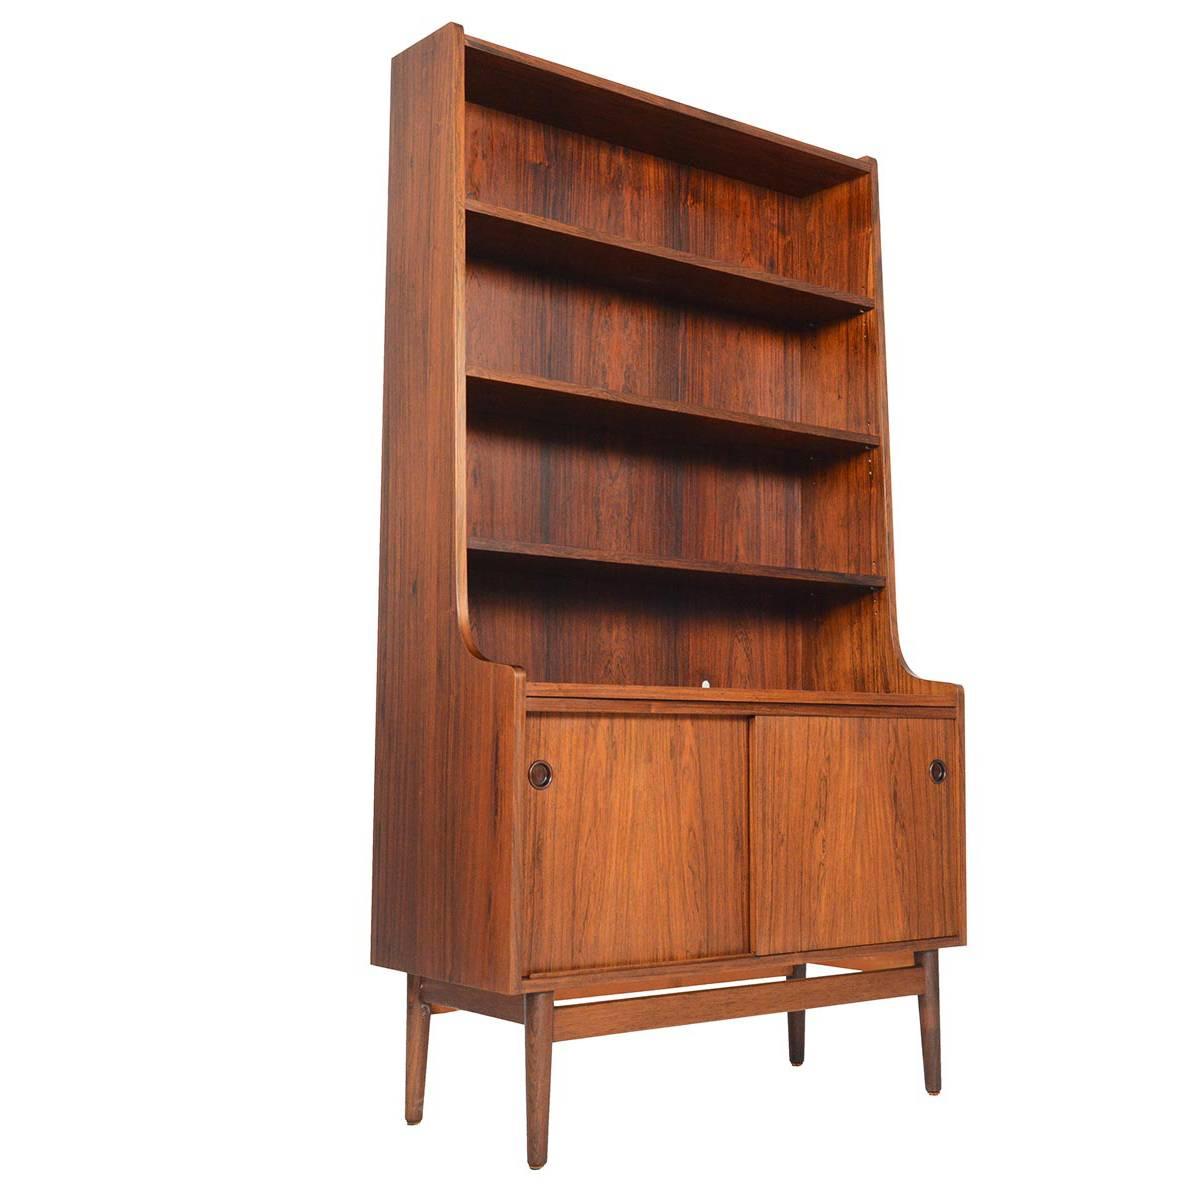 Danish Modern Midcentury Bookcase in Rosewood by Johannes Sorth #3